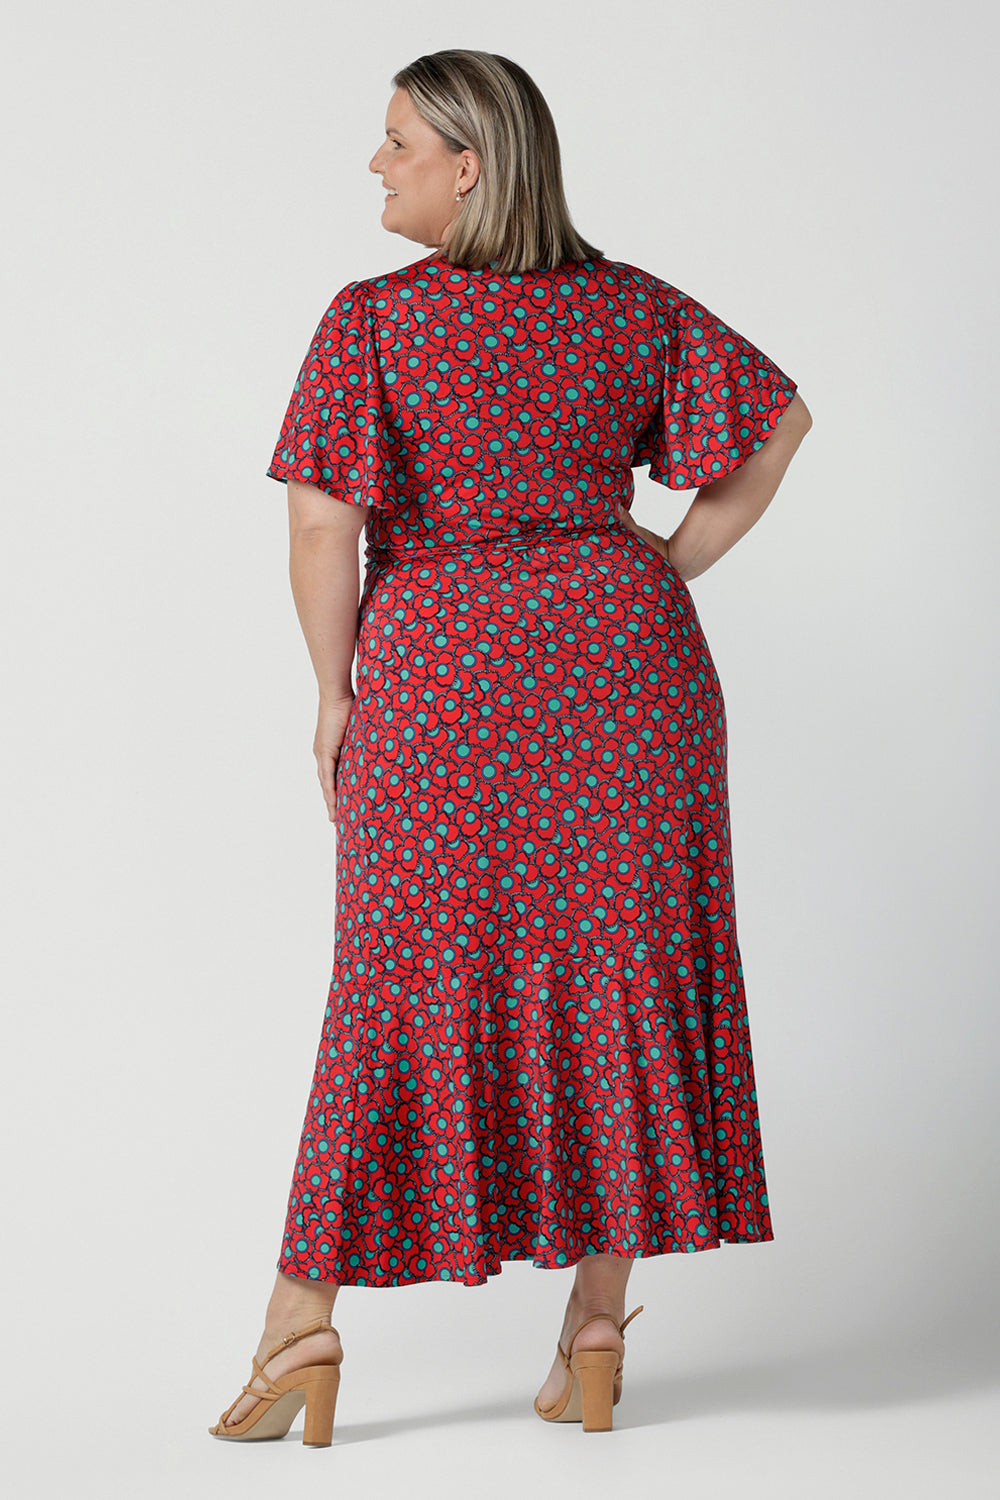 Back view of a curvy woman wearing a size 18 woman wearing a wrap dress in soft slinky jersey. The beautiful Rio print has seventies inspired florals with aqua.Romantic valentines day dressing, frill hem and flutter sleeve for curvy women size 8 - 24.